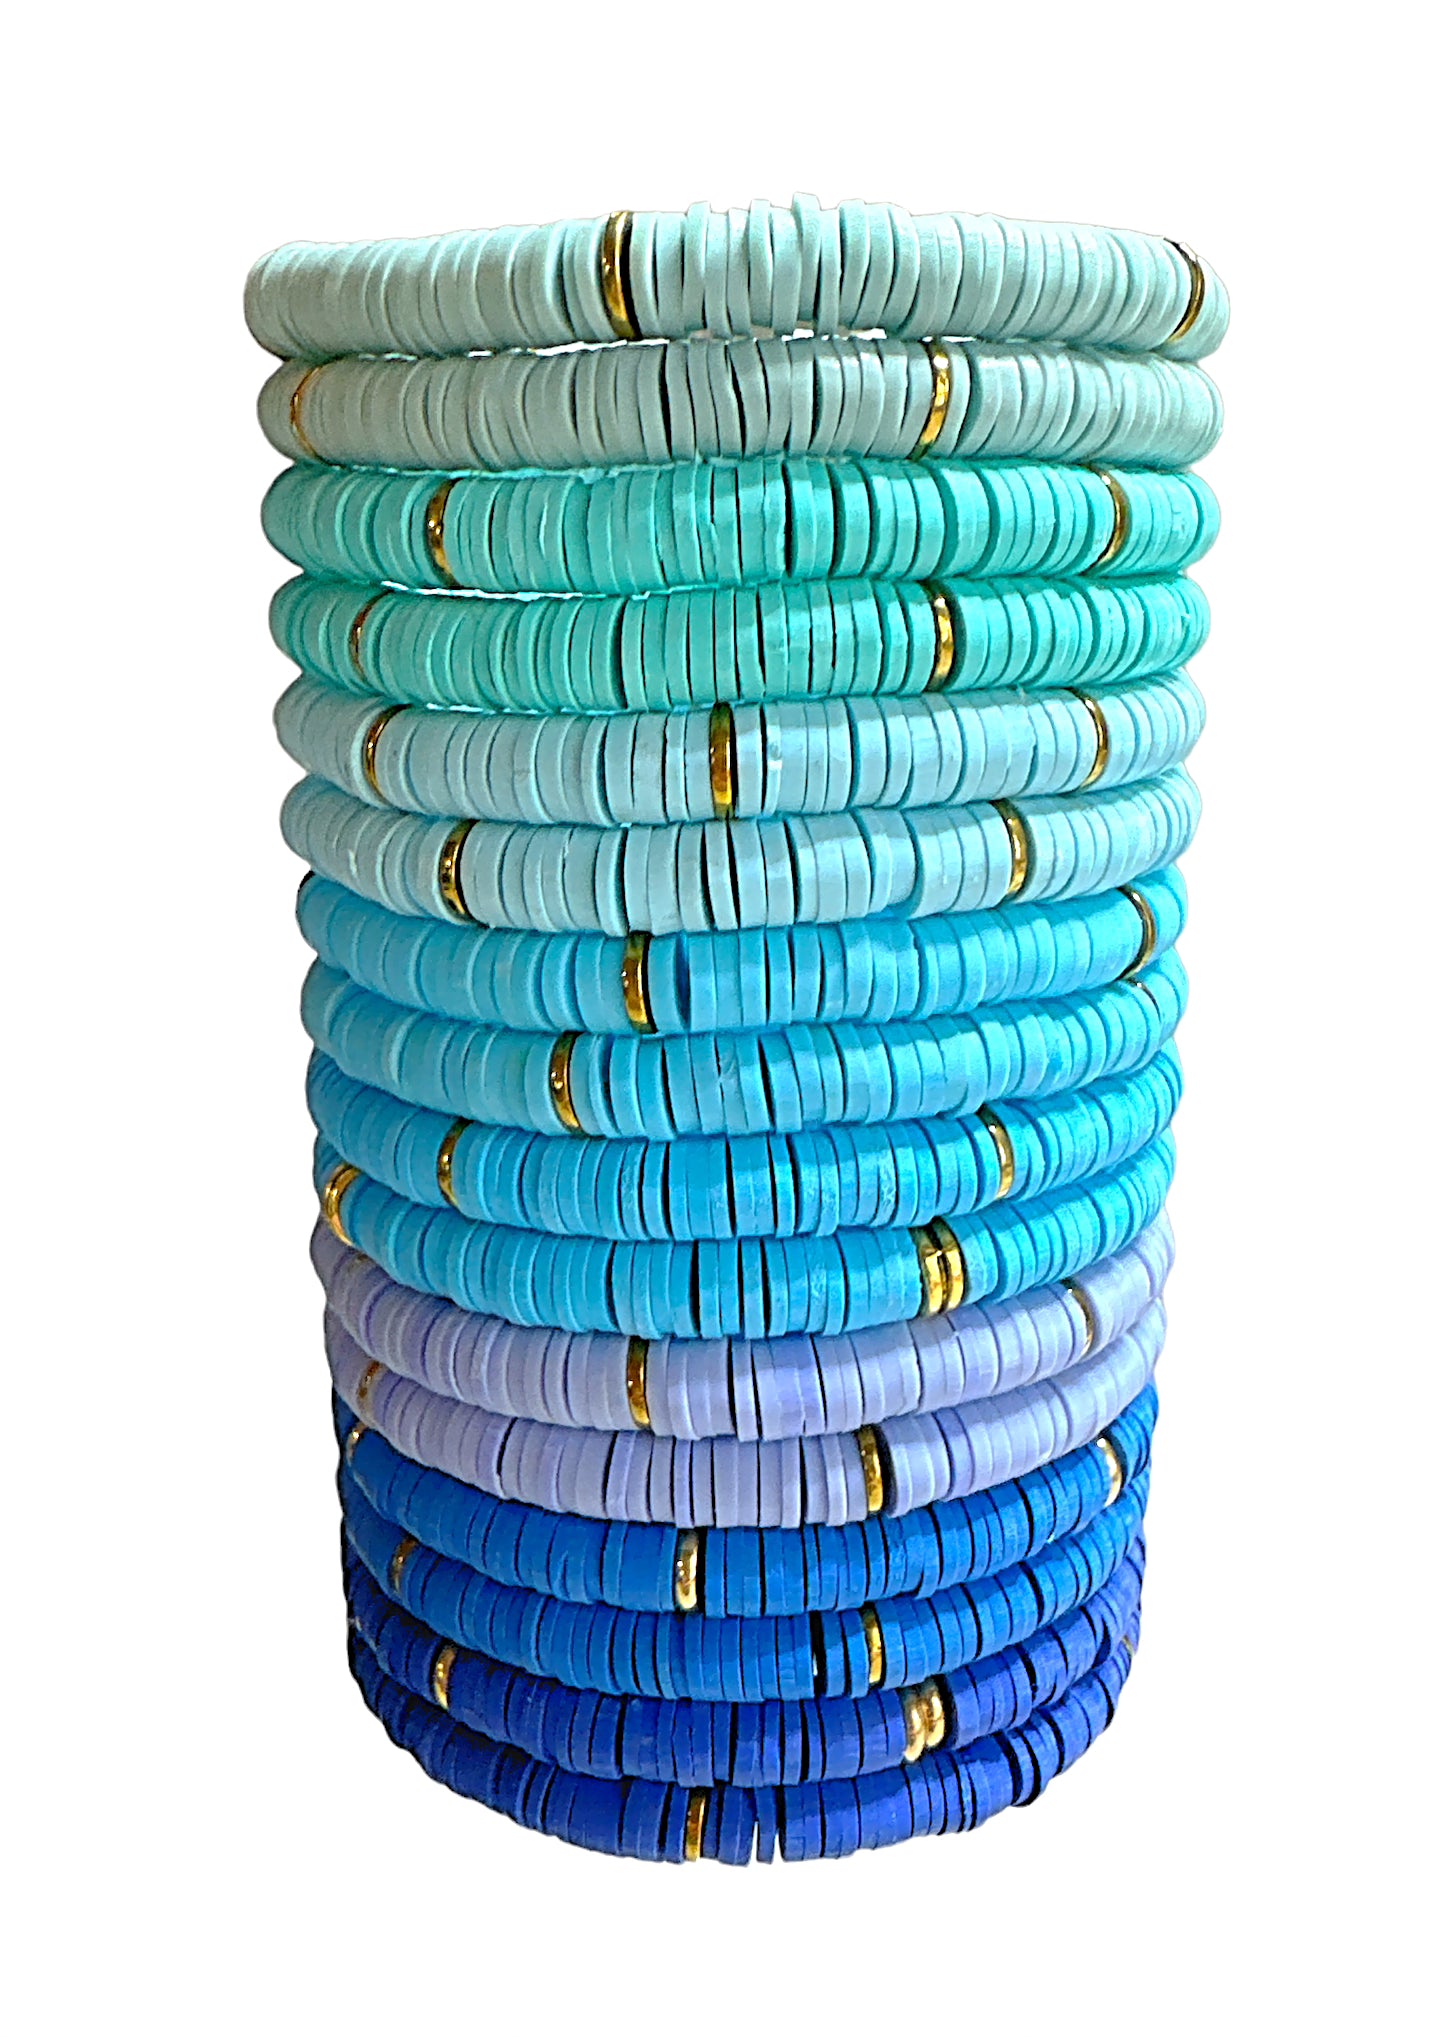 Approx. 15 Strand 4x1mm Polymer Clay Heishe Beads, Sky Blue